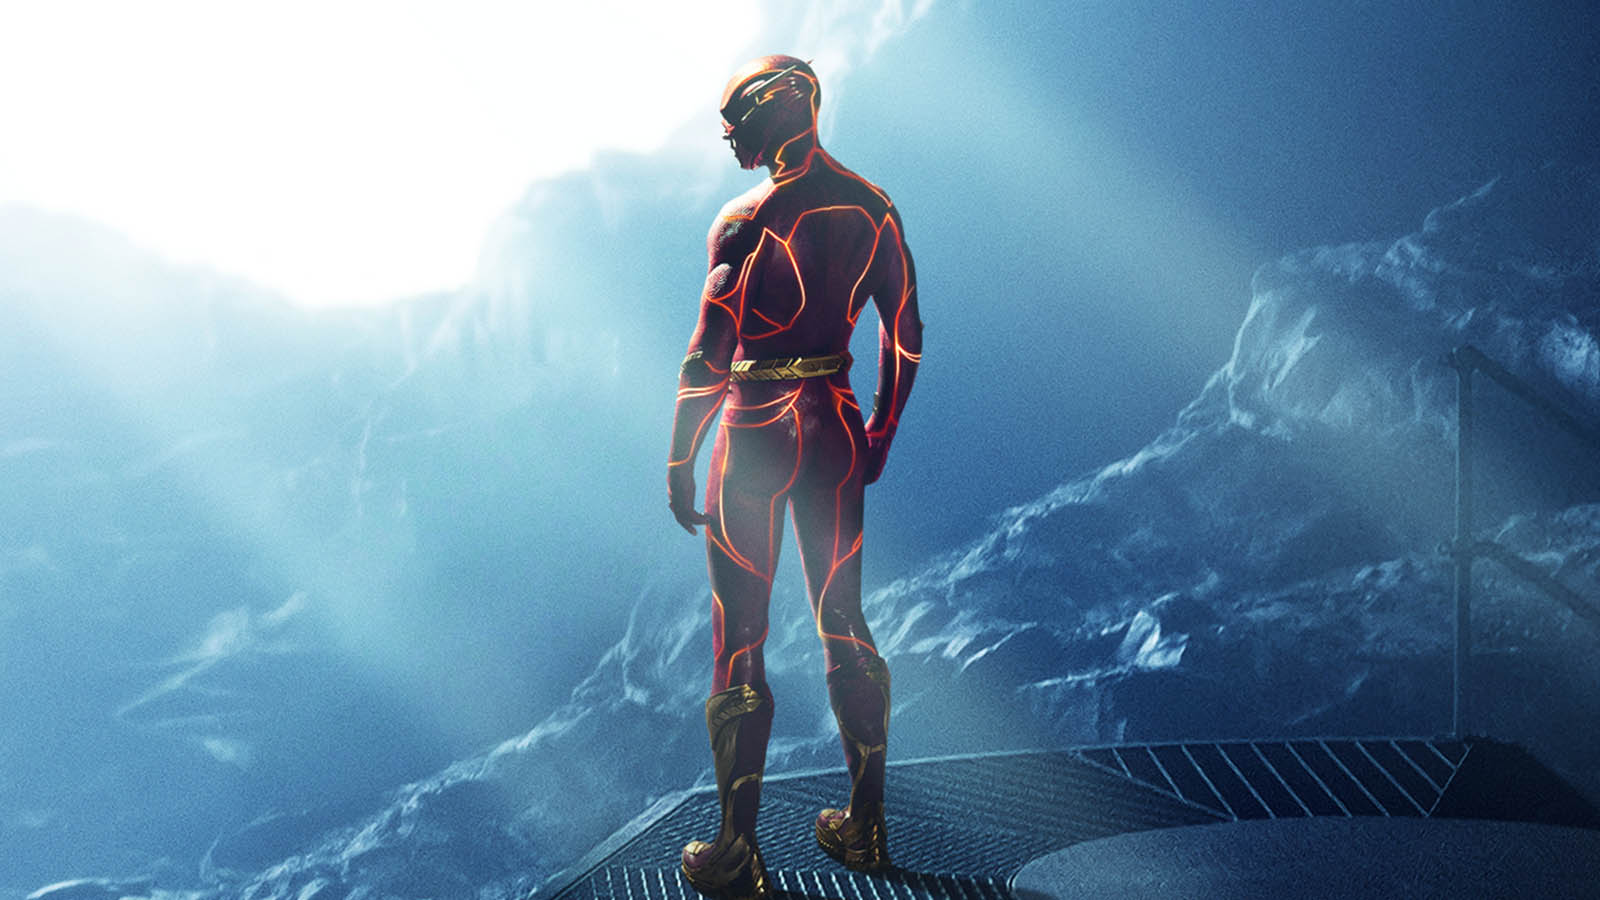 Worlds Collide In Action-Heavy Final Trailer For The Flash